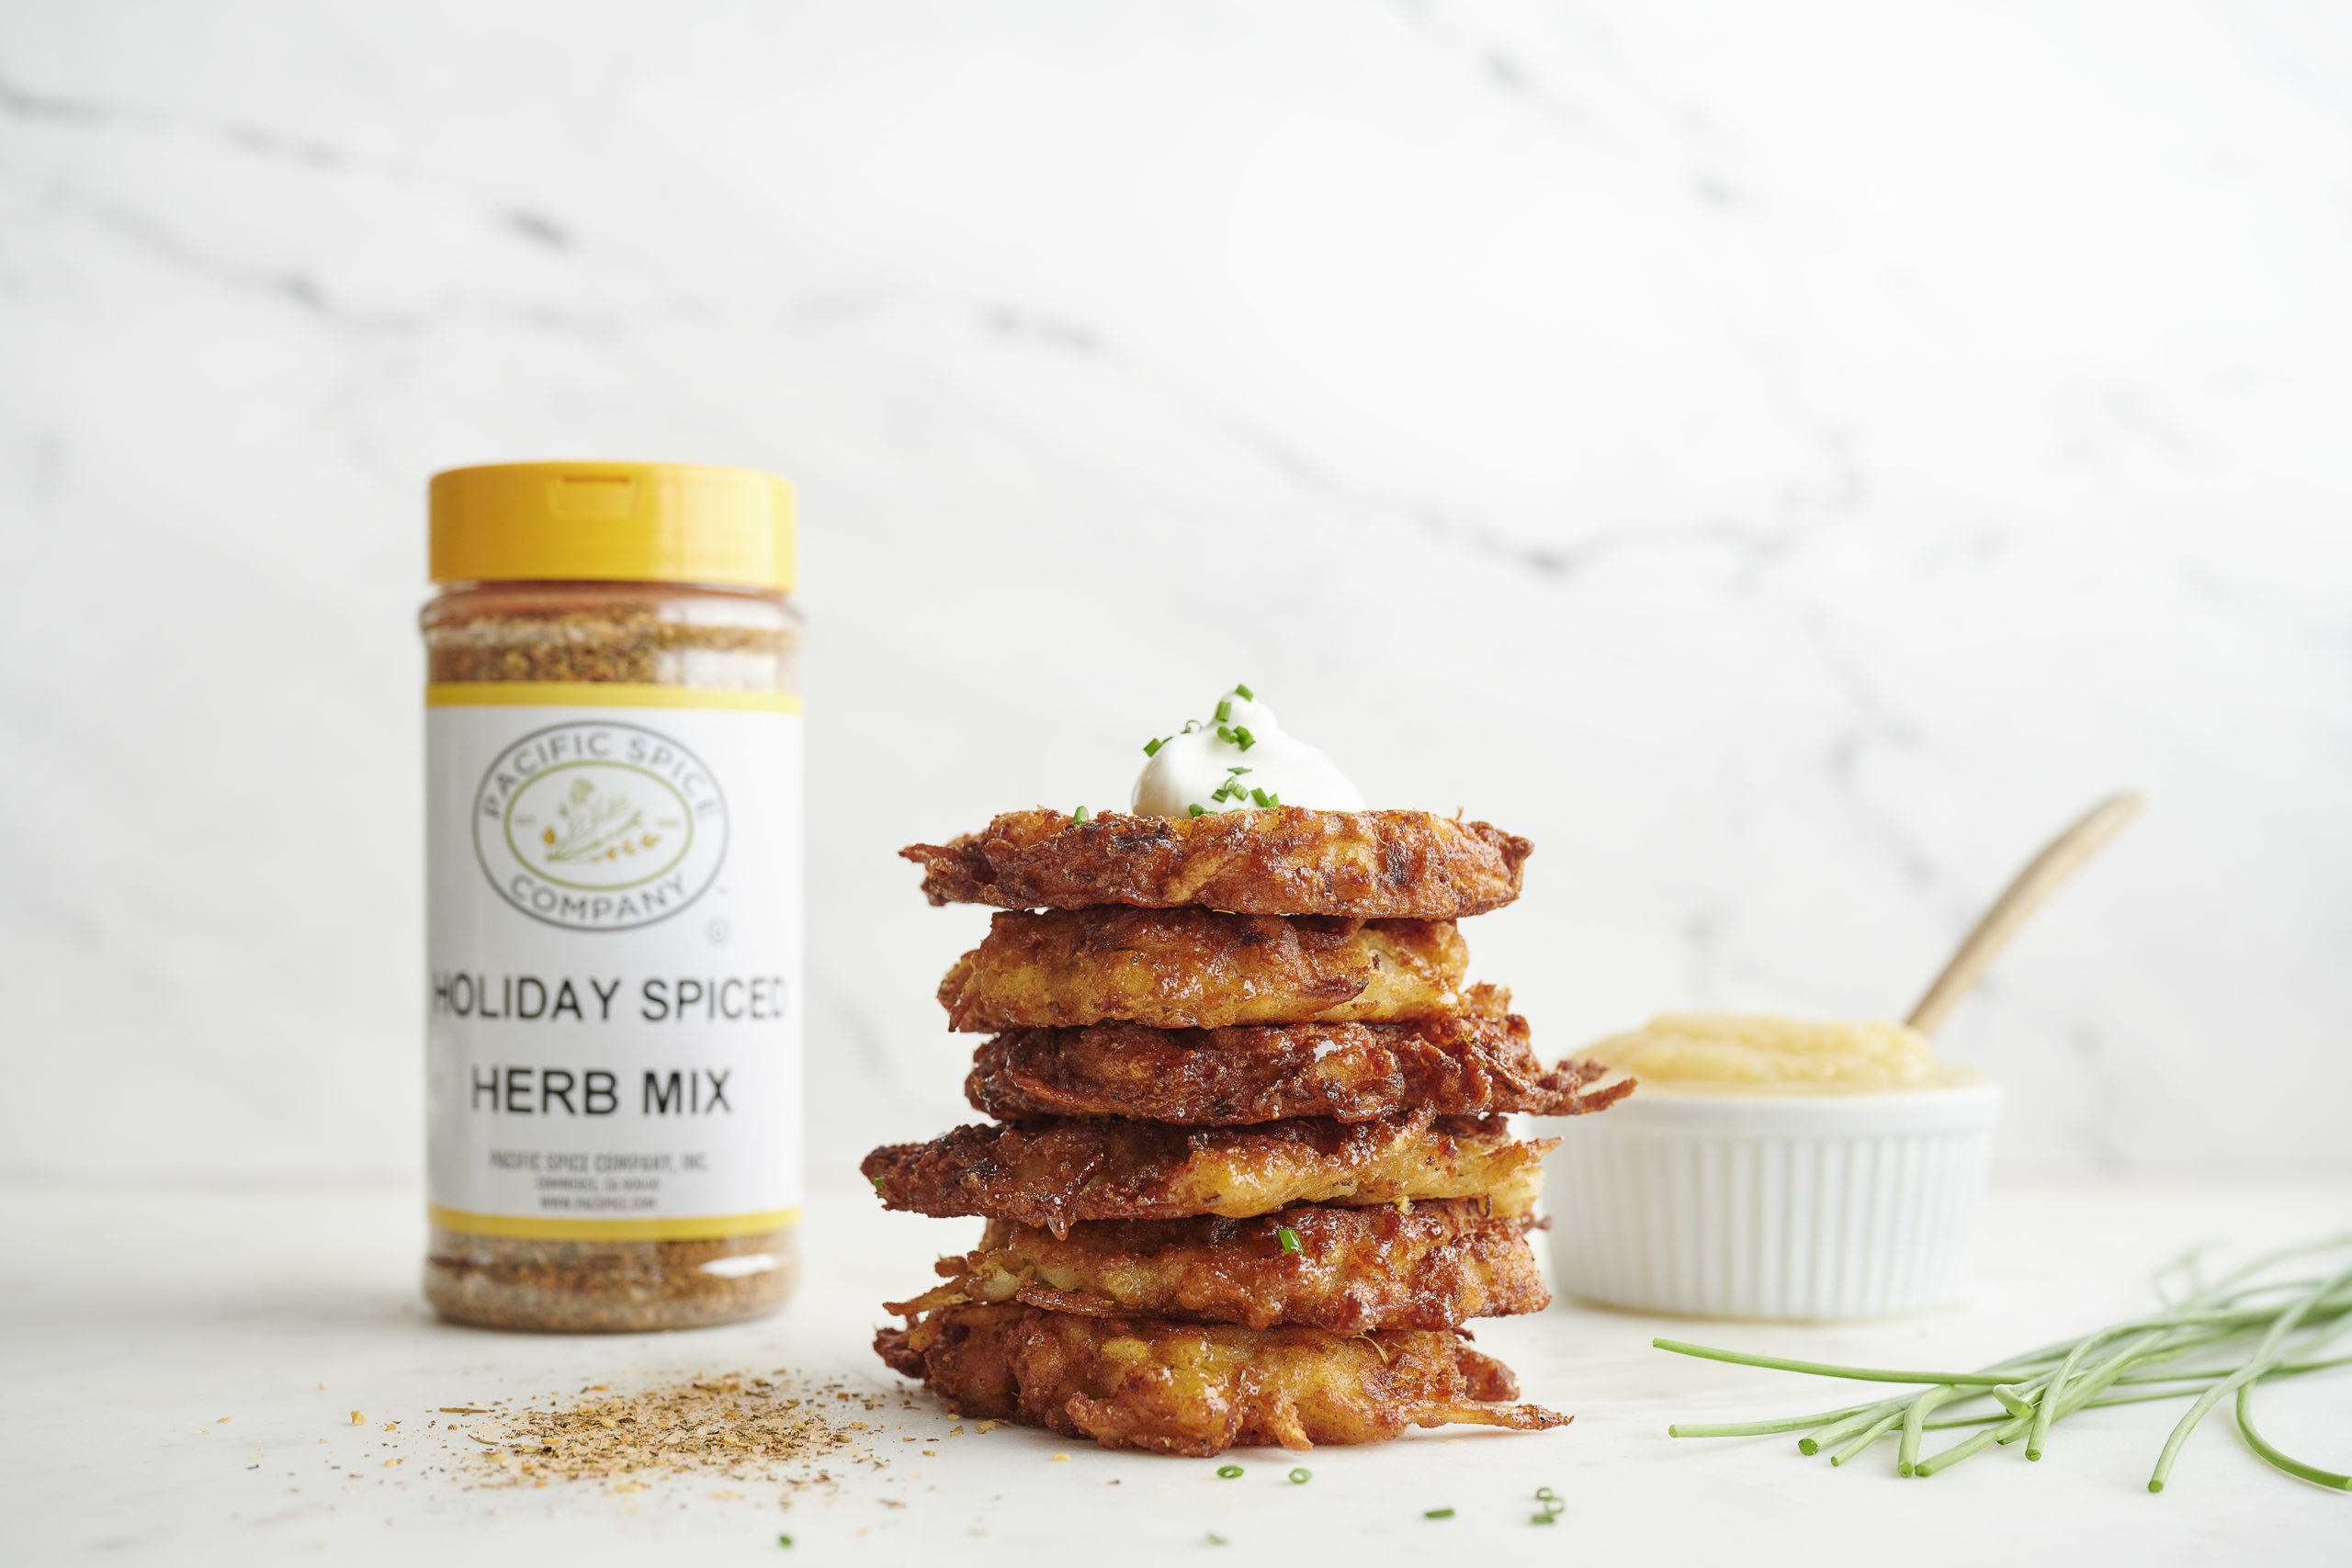 stack of fried potato latkes with Pacific Spice holiday spice herb mixs